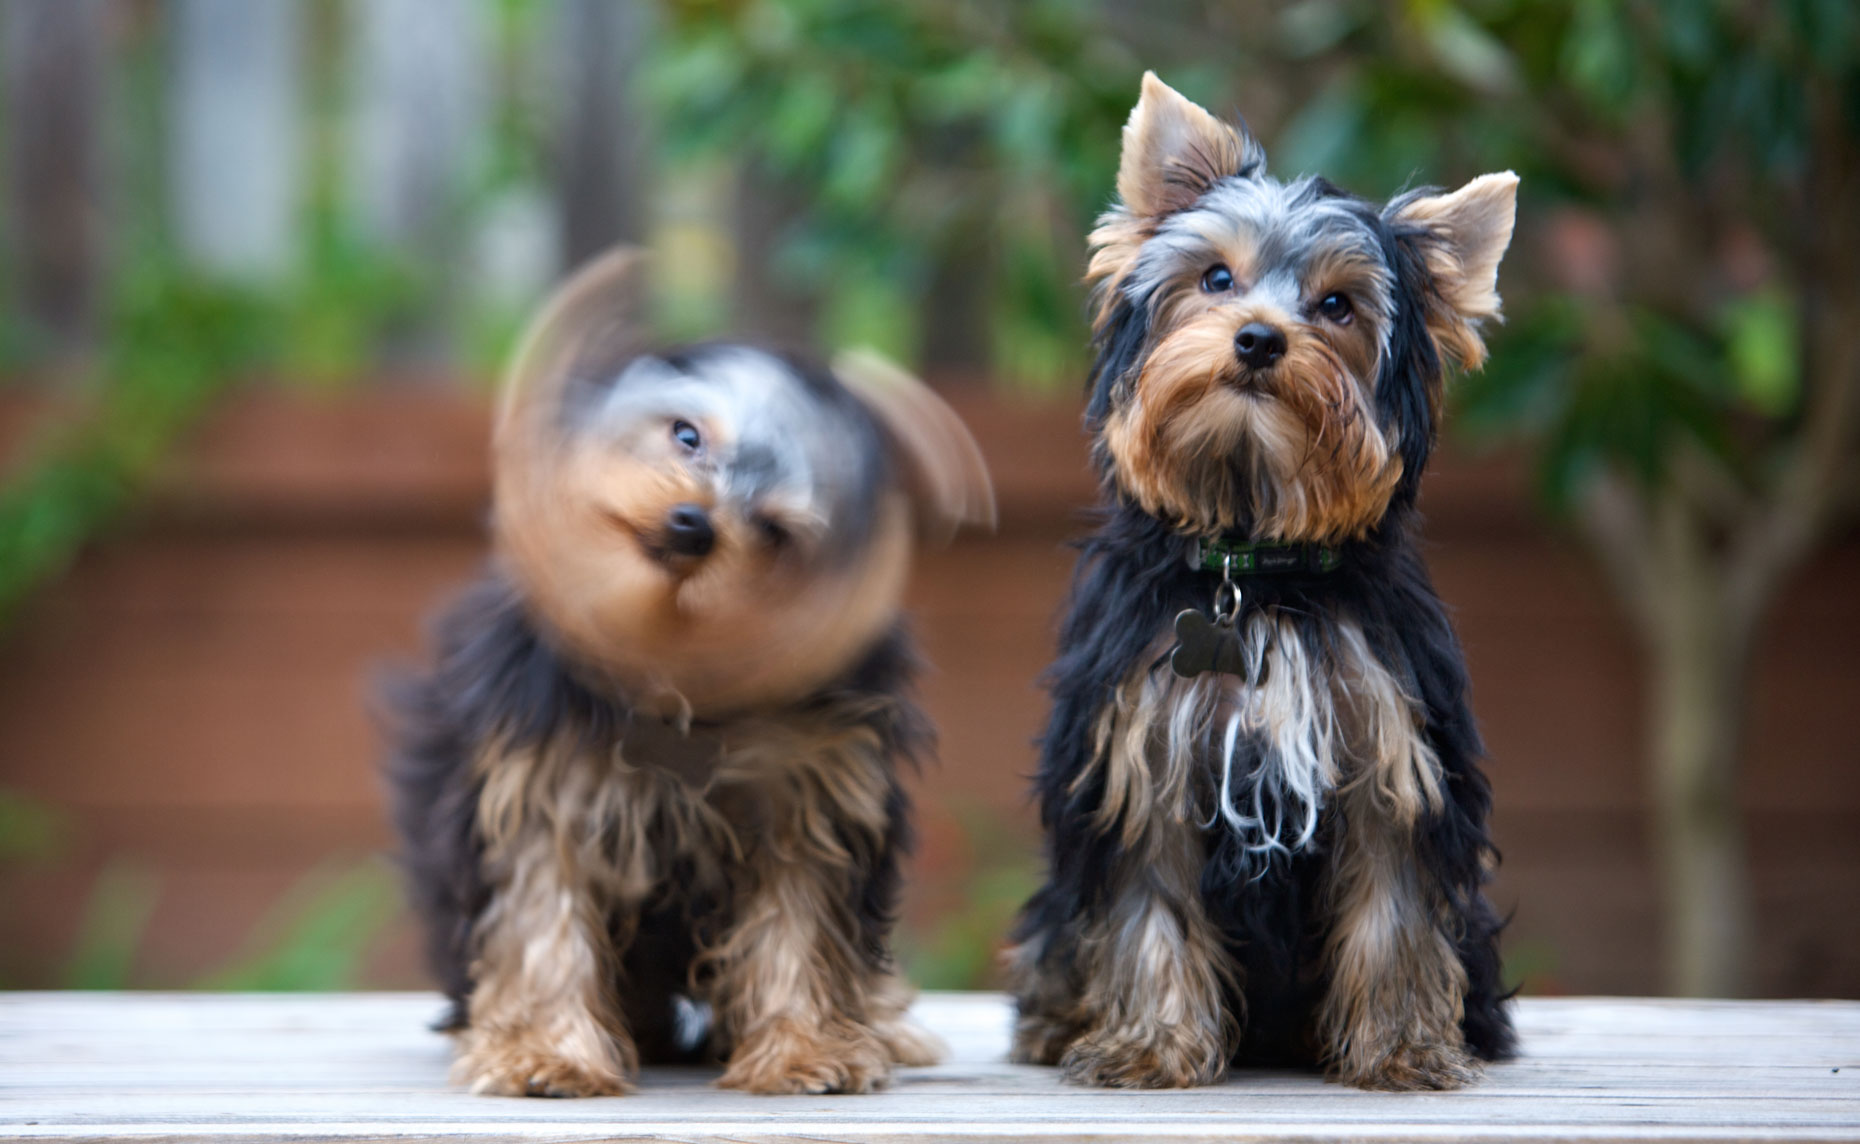 Dog and Pet Photography  |  Two Yorkie Dogs by Mark Rogers